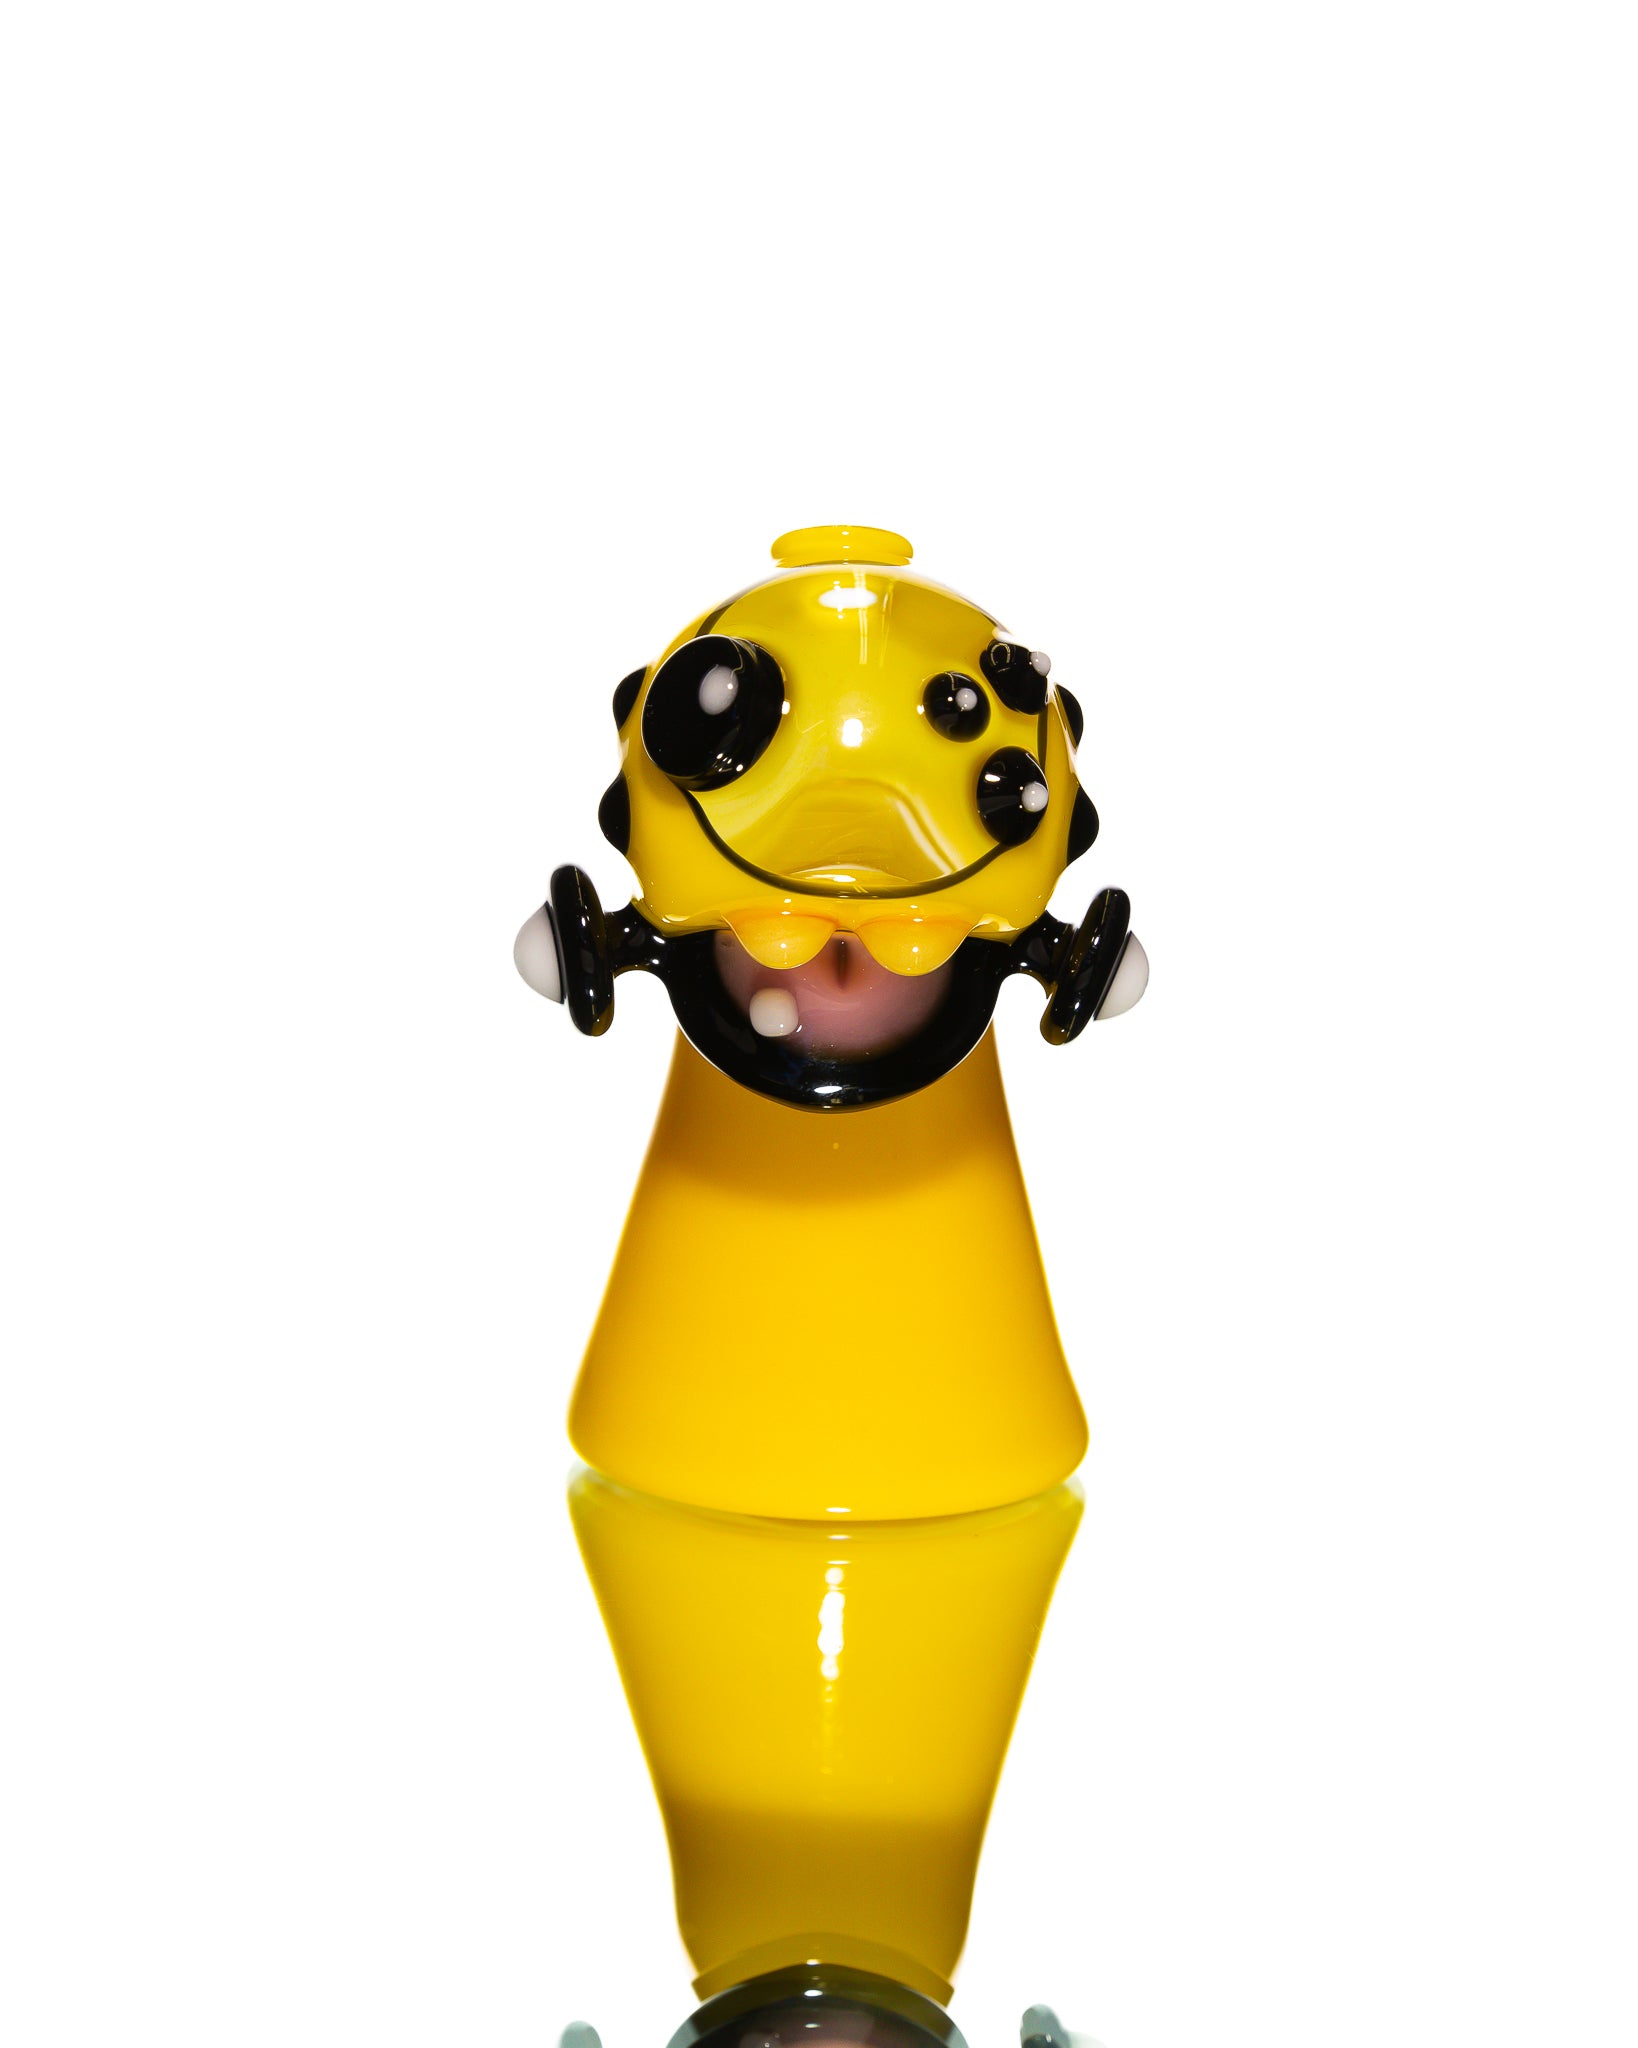 Kerby Glass - Yellow Bot Jammer